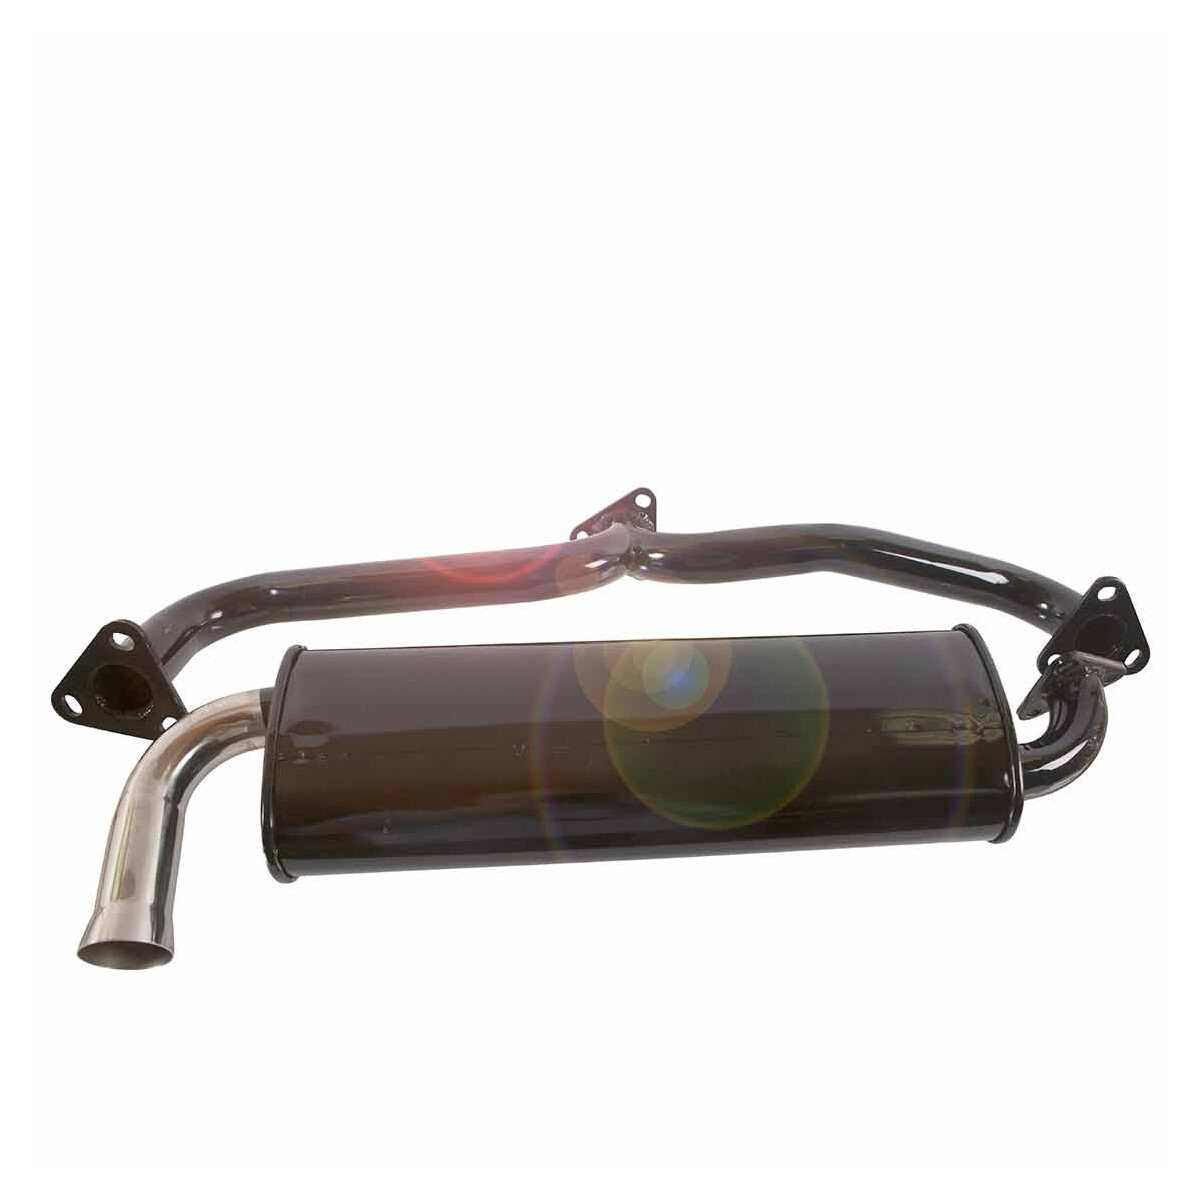 Type2 bay Empi Dual quiet pack exhaust for typ4 engines with injectio